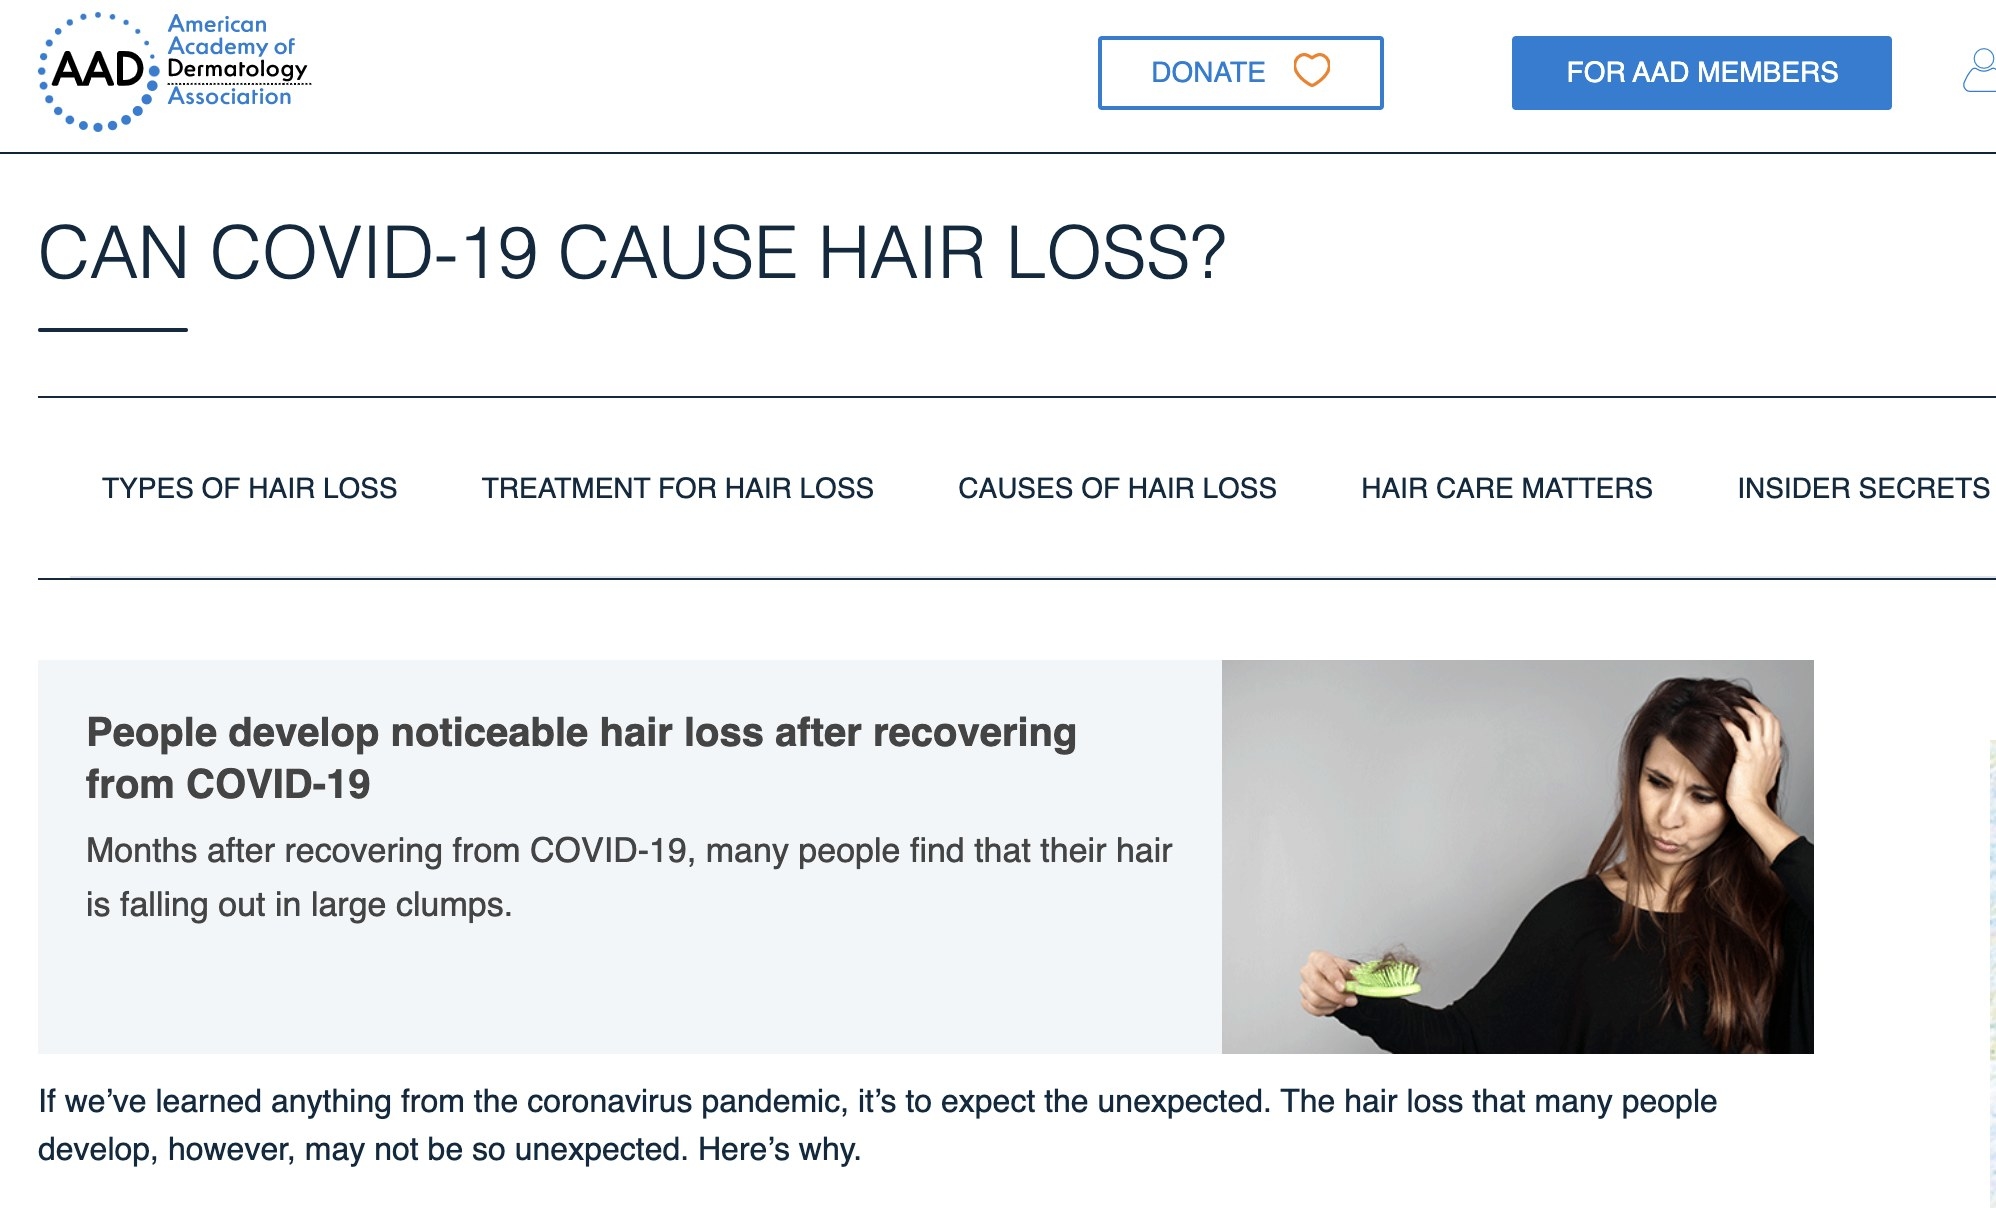 The American Academy of Dermatology Association website which states people develop noticeable hair loss after recovering